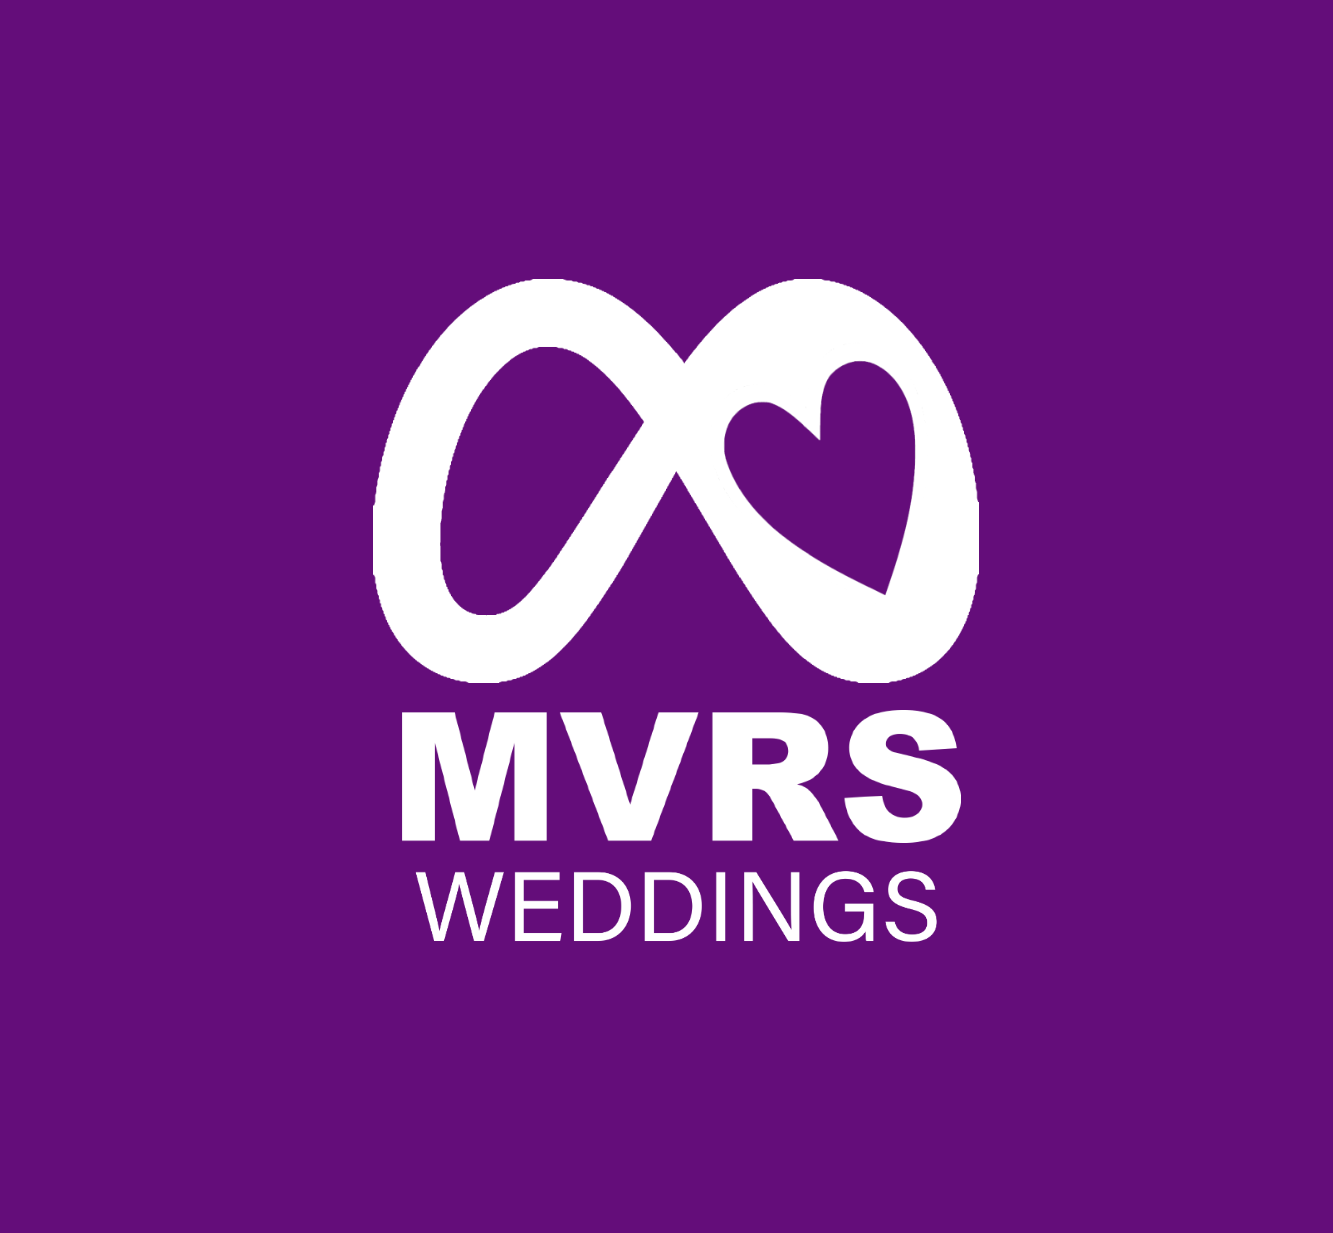 MVRS Weddings: Transforming the Wedding Industry with New and Innovative Technology